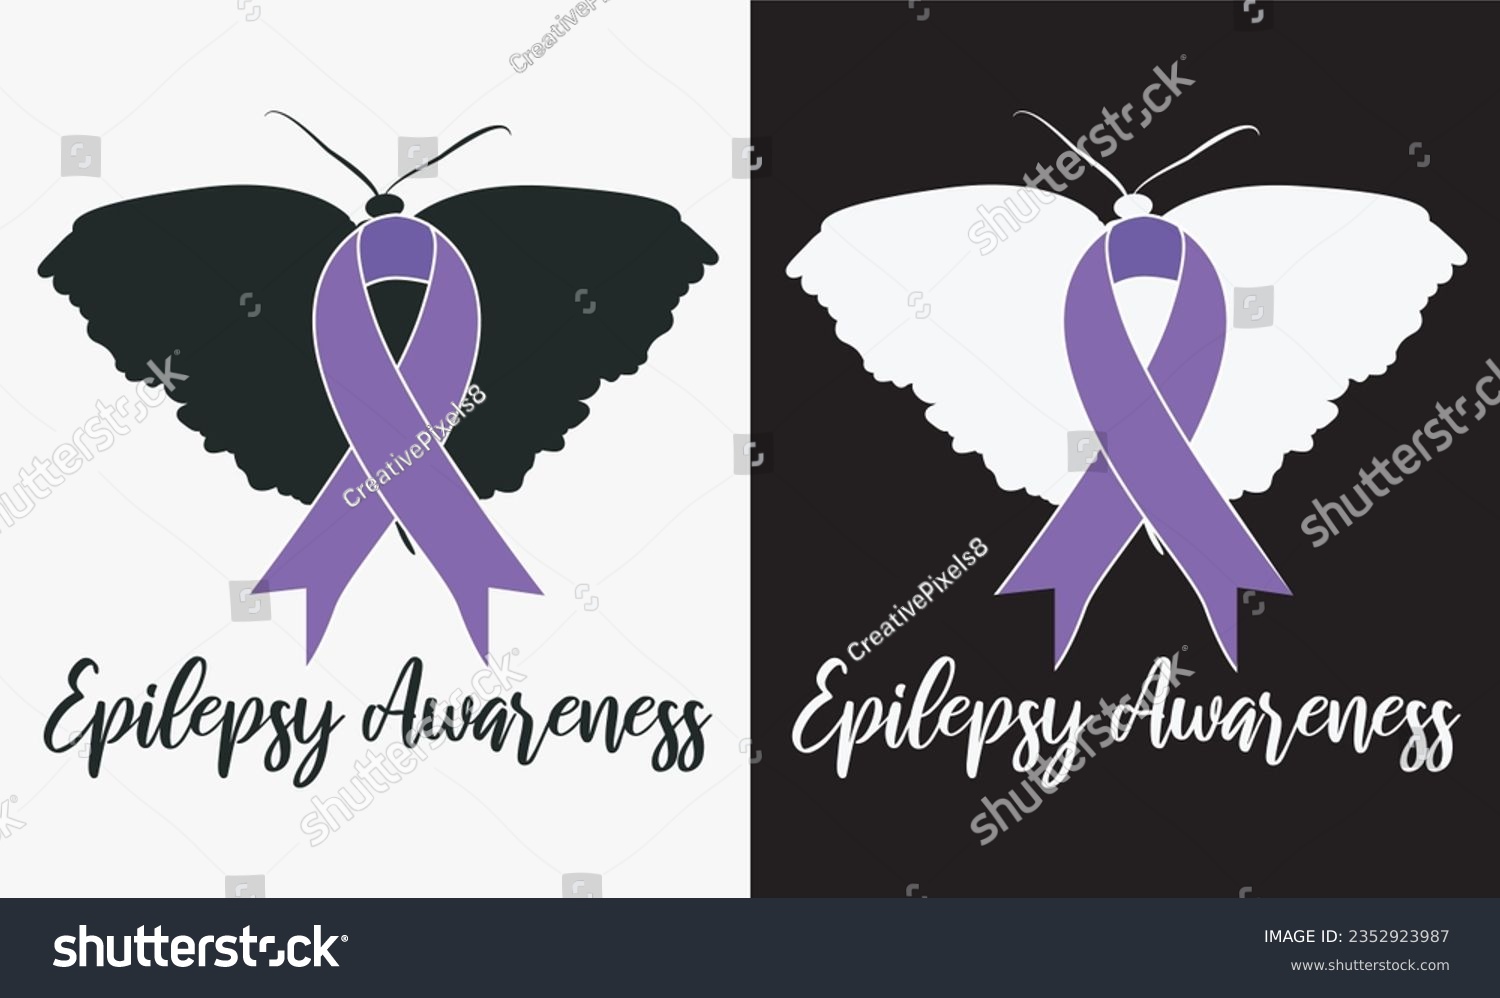 SVG of Epilepsy Awareness Butterfly Purple Ribbon Epilepsy T-shirt, Creative Epilepsy Awareness Vector, Trendy Seizure Disorder Vector for SVG, T-shirt, Card, Wall art, Hoodie and others svg